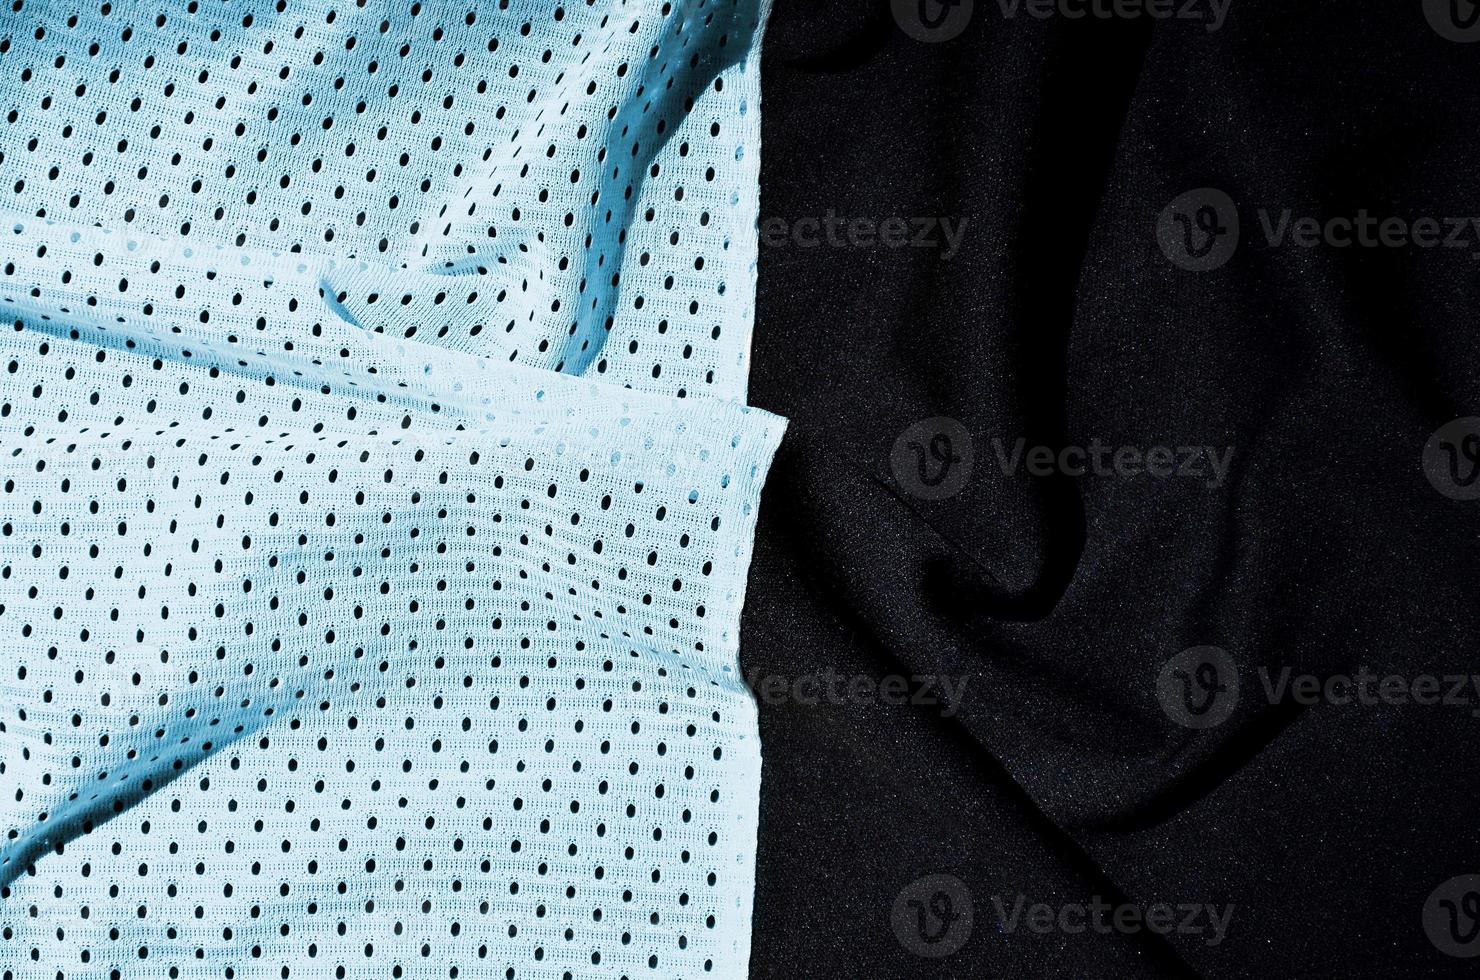 Sport clothing fabric texture background. Top view of light blue polyester nylon cloth textile surface. Colored basketball shirt with free space for text photo